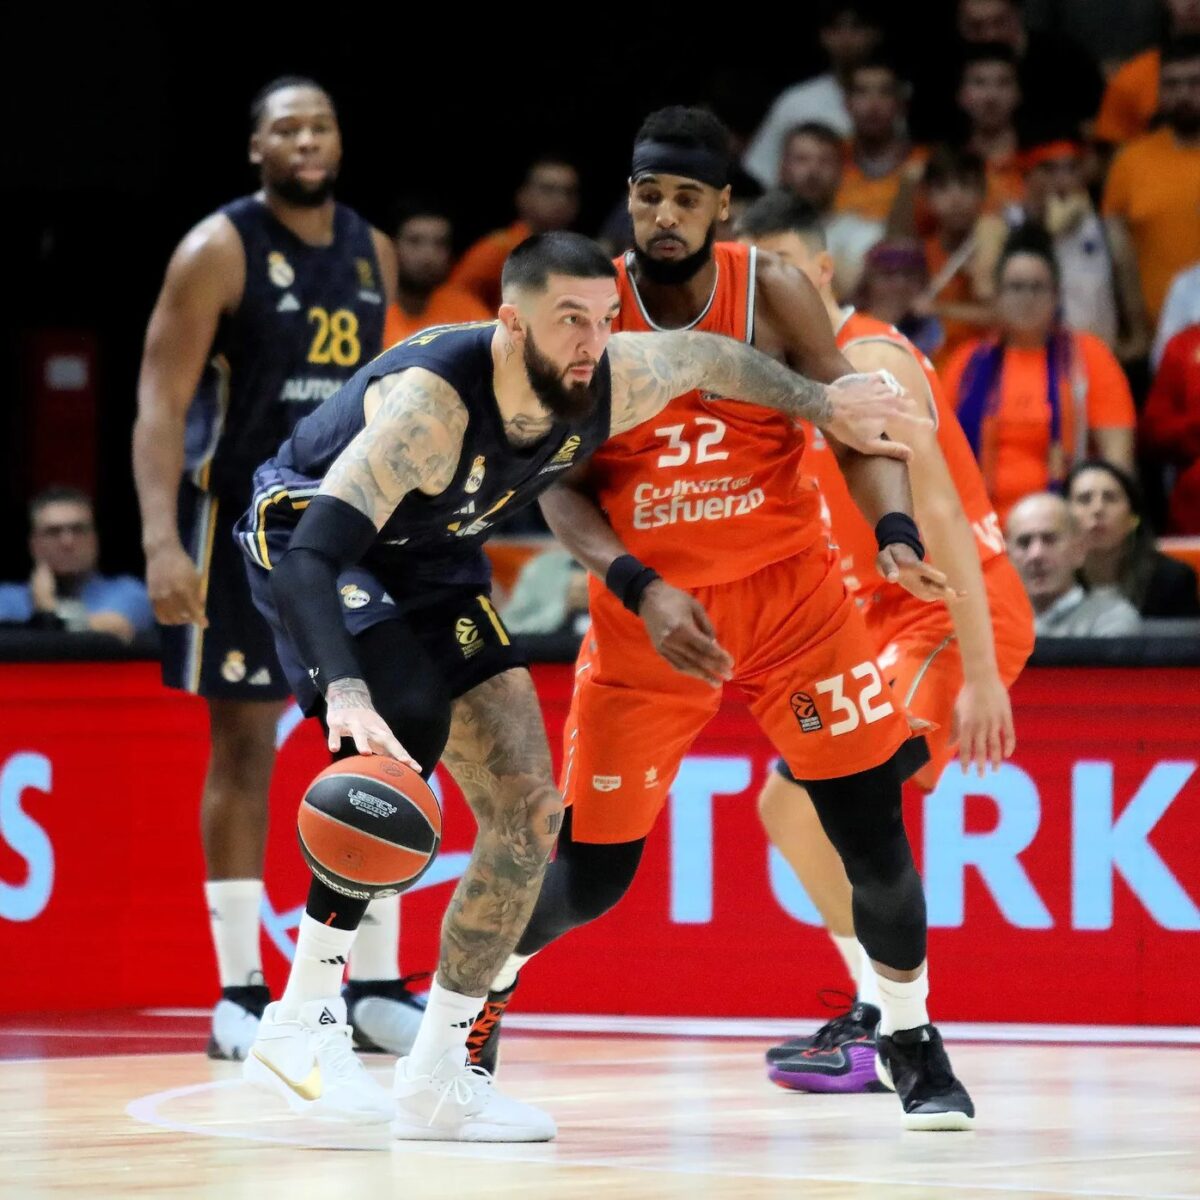 Vincent Poirier of Real Madrid and Brandon Davies of Valencia are set to do battle in Euroleague Basketball